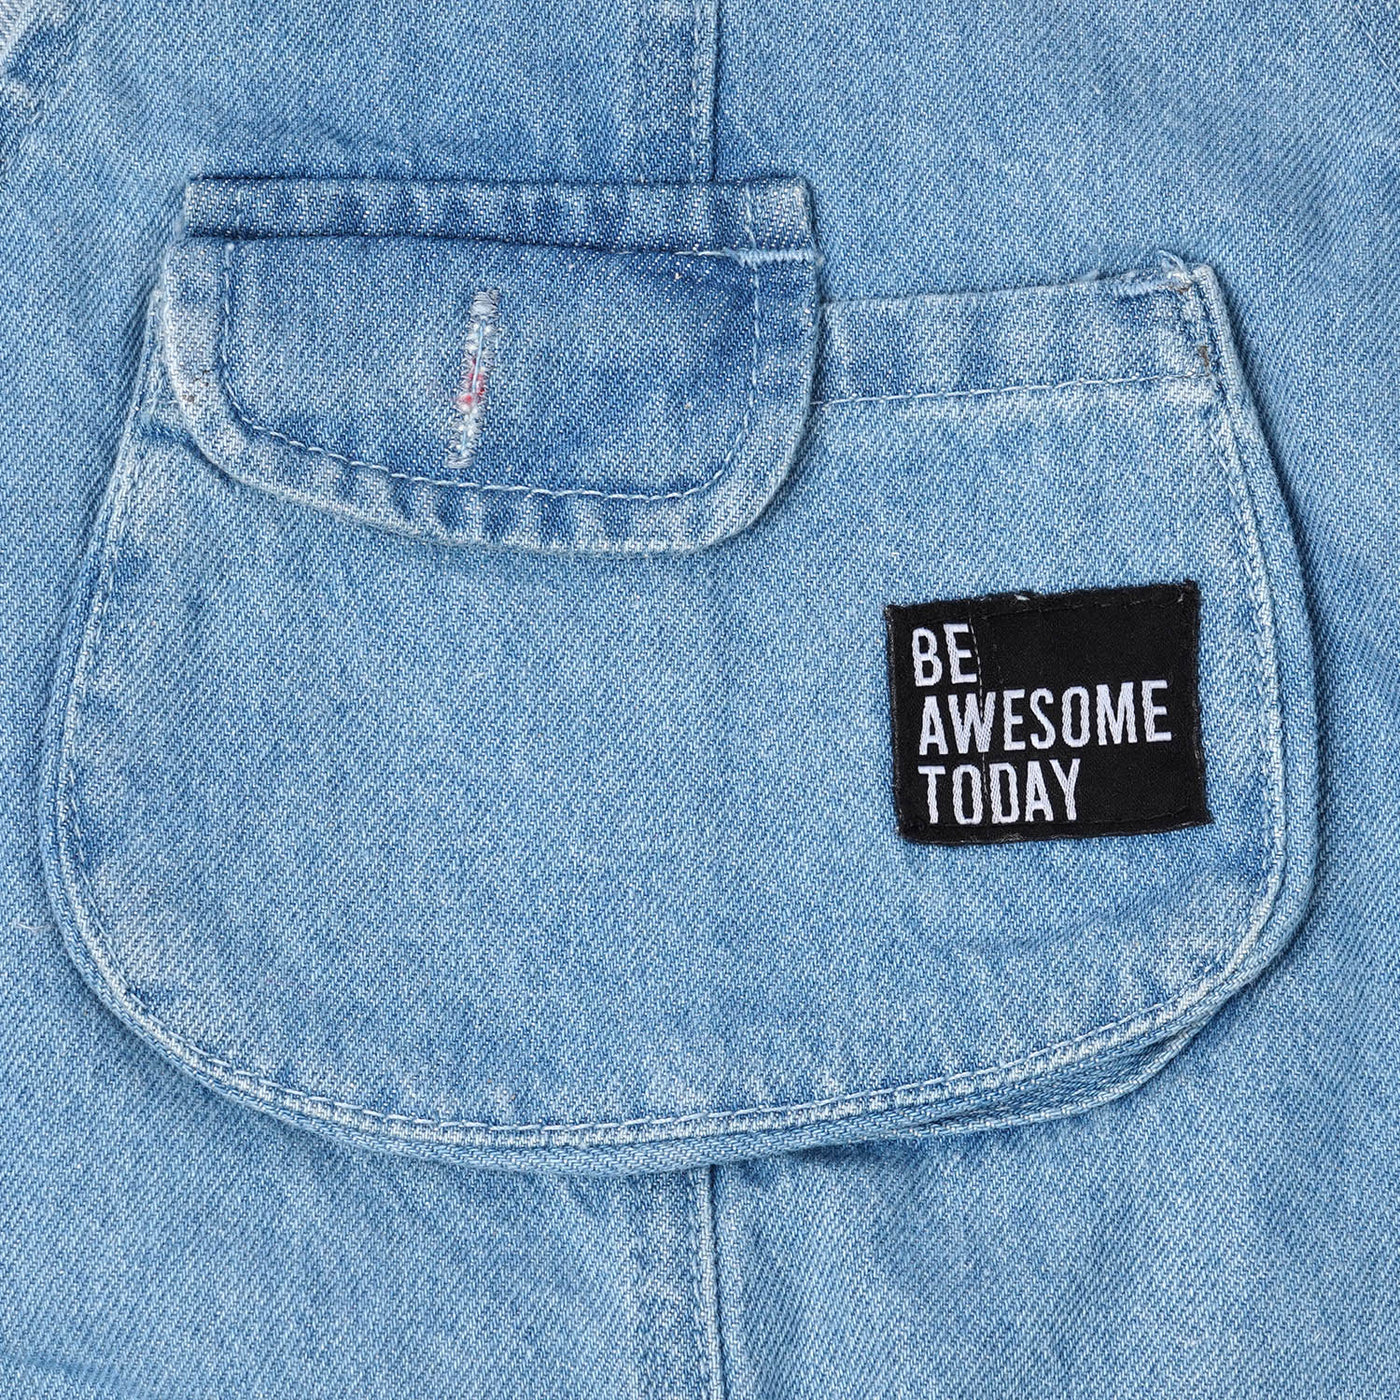 Boys Denim Over All Dangri Awesome - Ice Blue